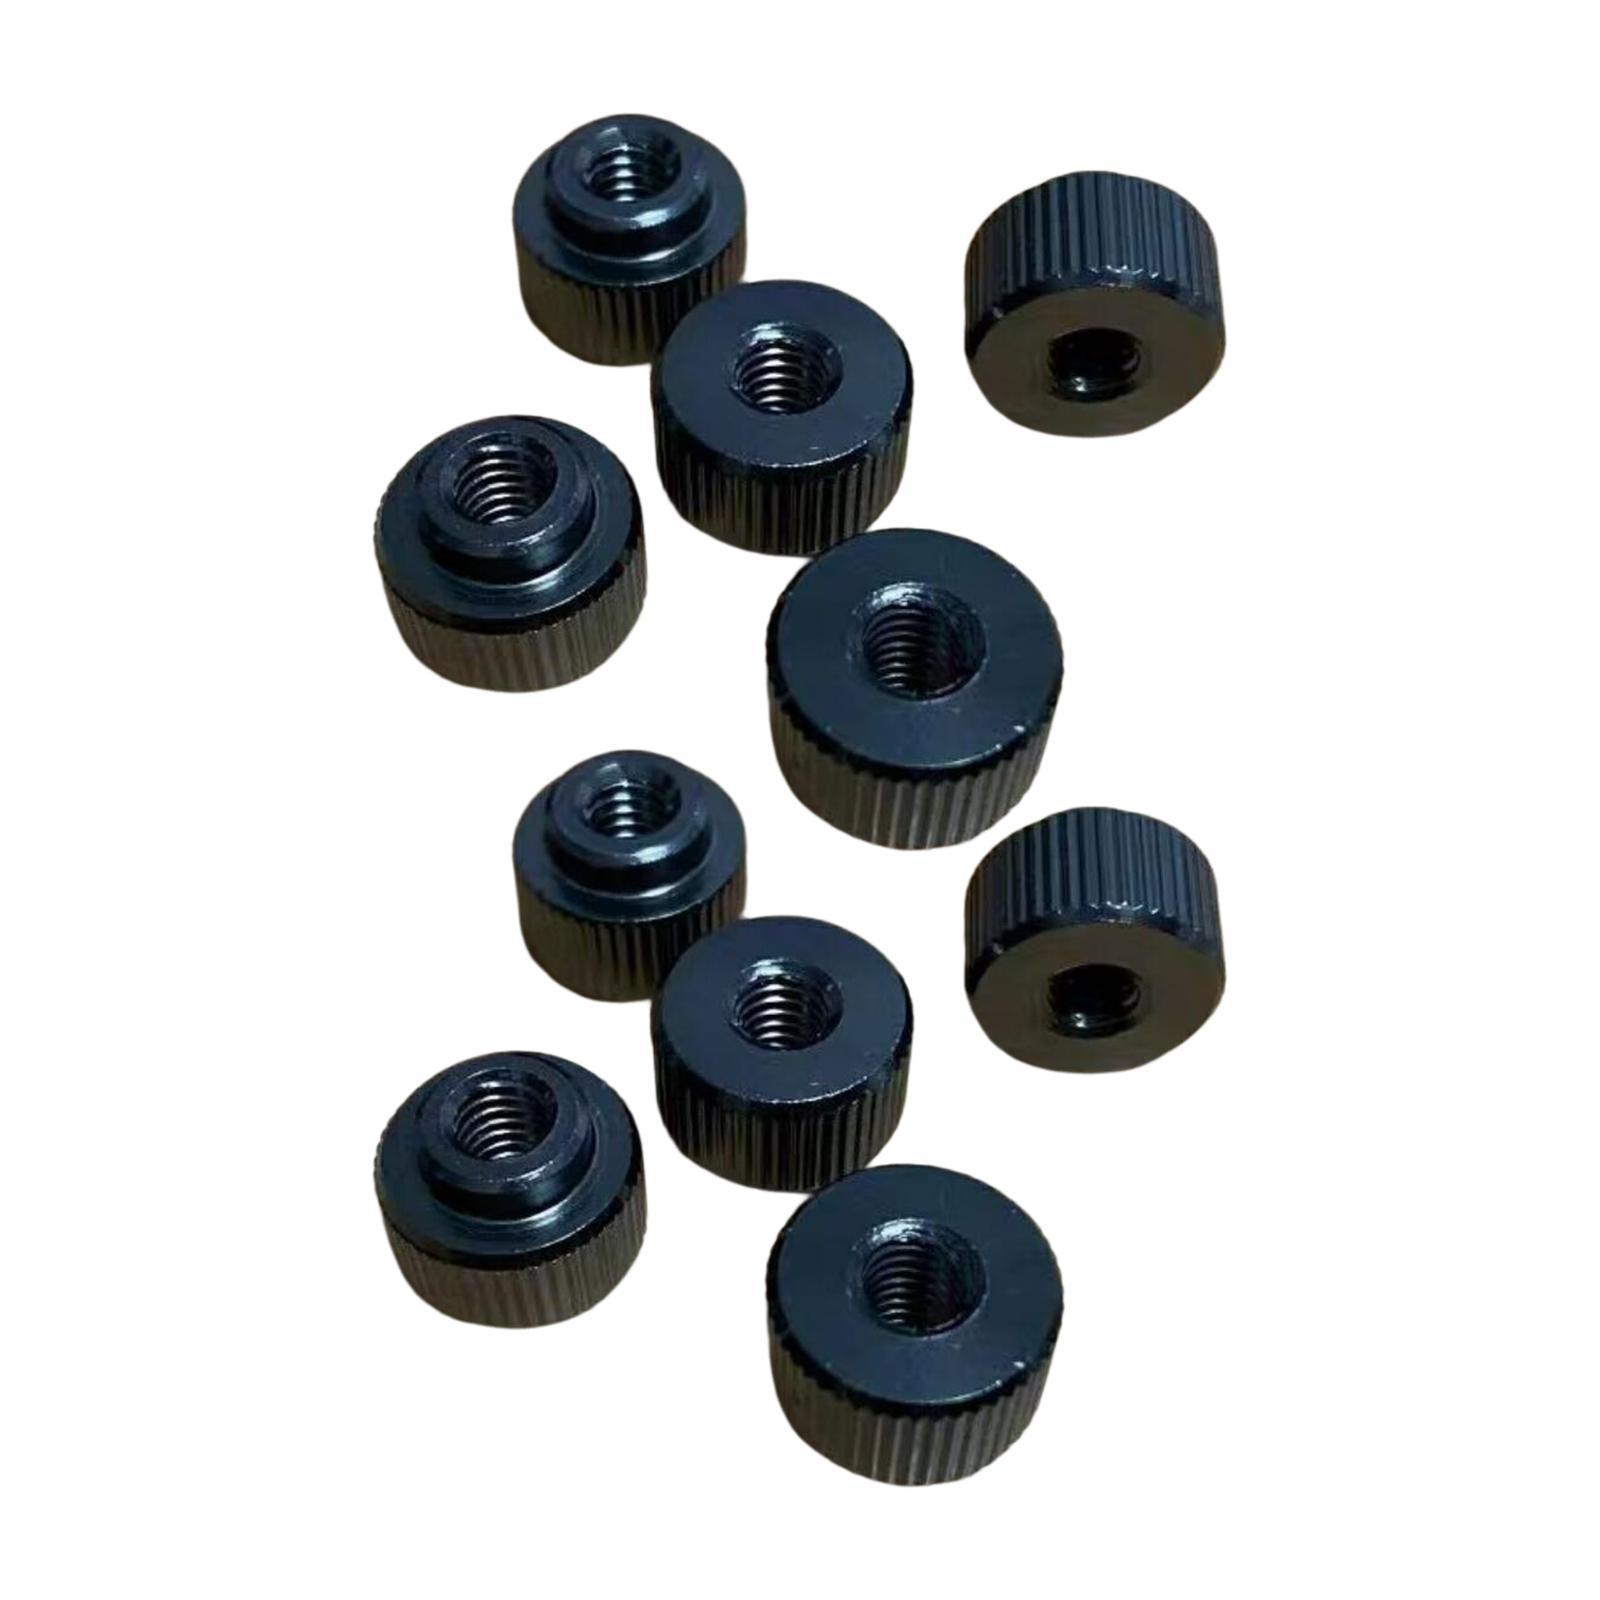 10 Pieces Drum Screw Nuts Replace for 732 Screws Easily Install Percussion Parts Drums Accs Durable Universal Metal Hardware Mounts